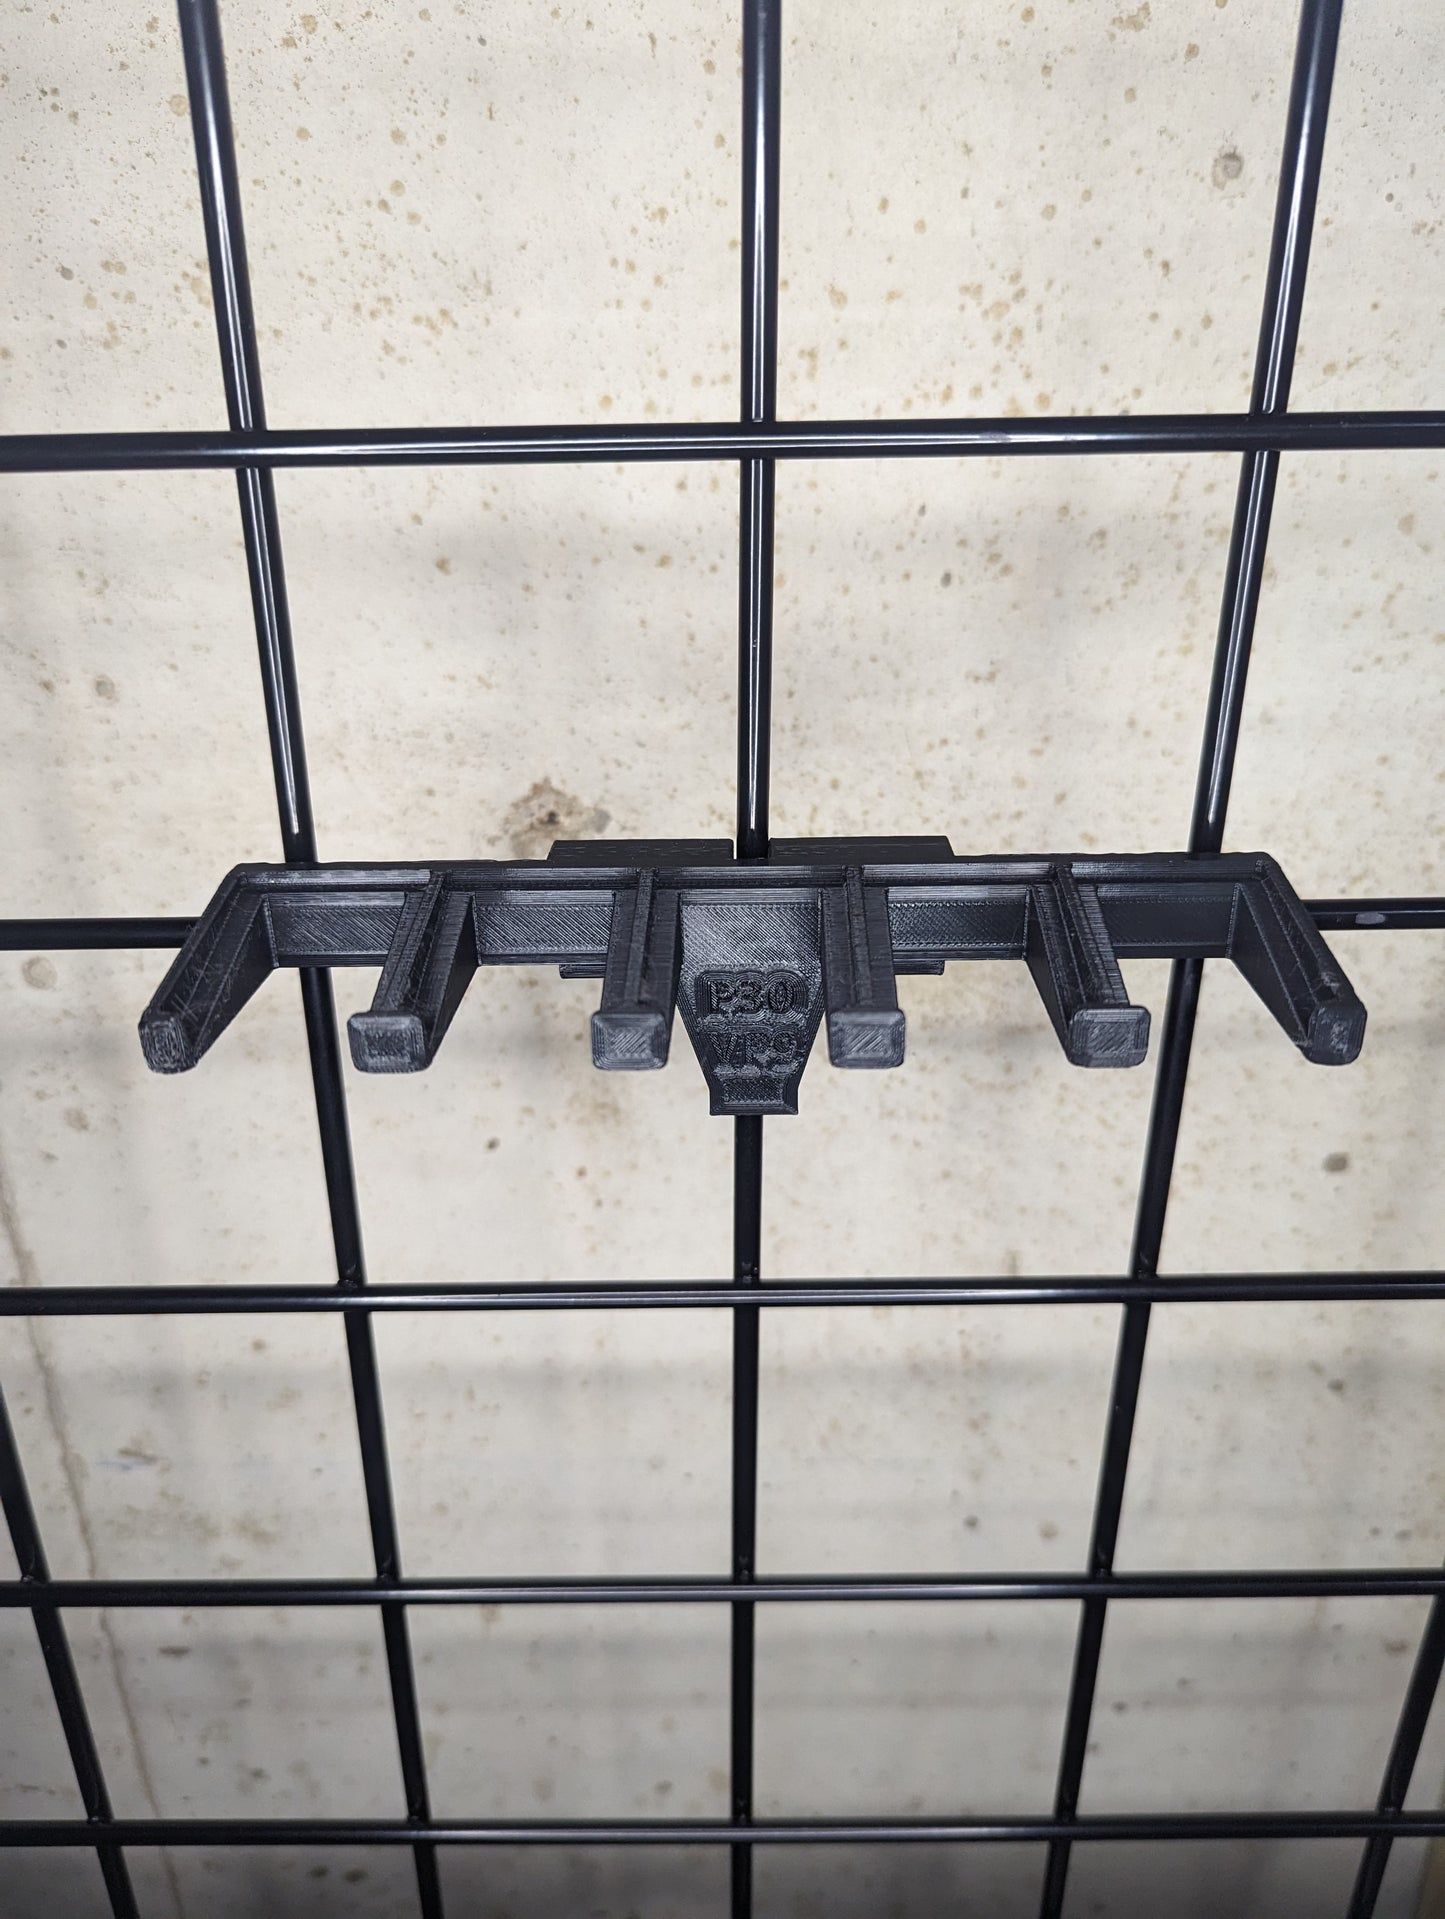 Mount for HK USP 9 Compact Mags - Gridwall | Magazine Holder Storage Rack